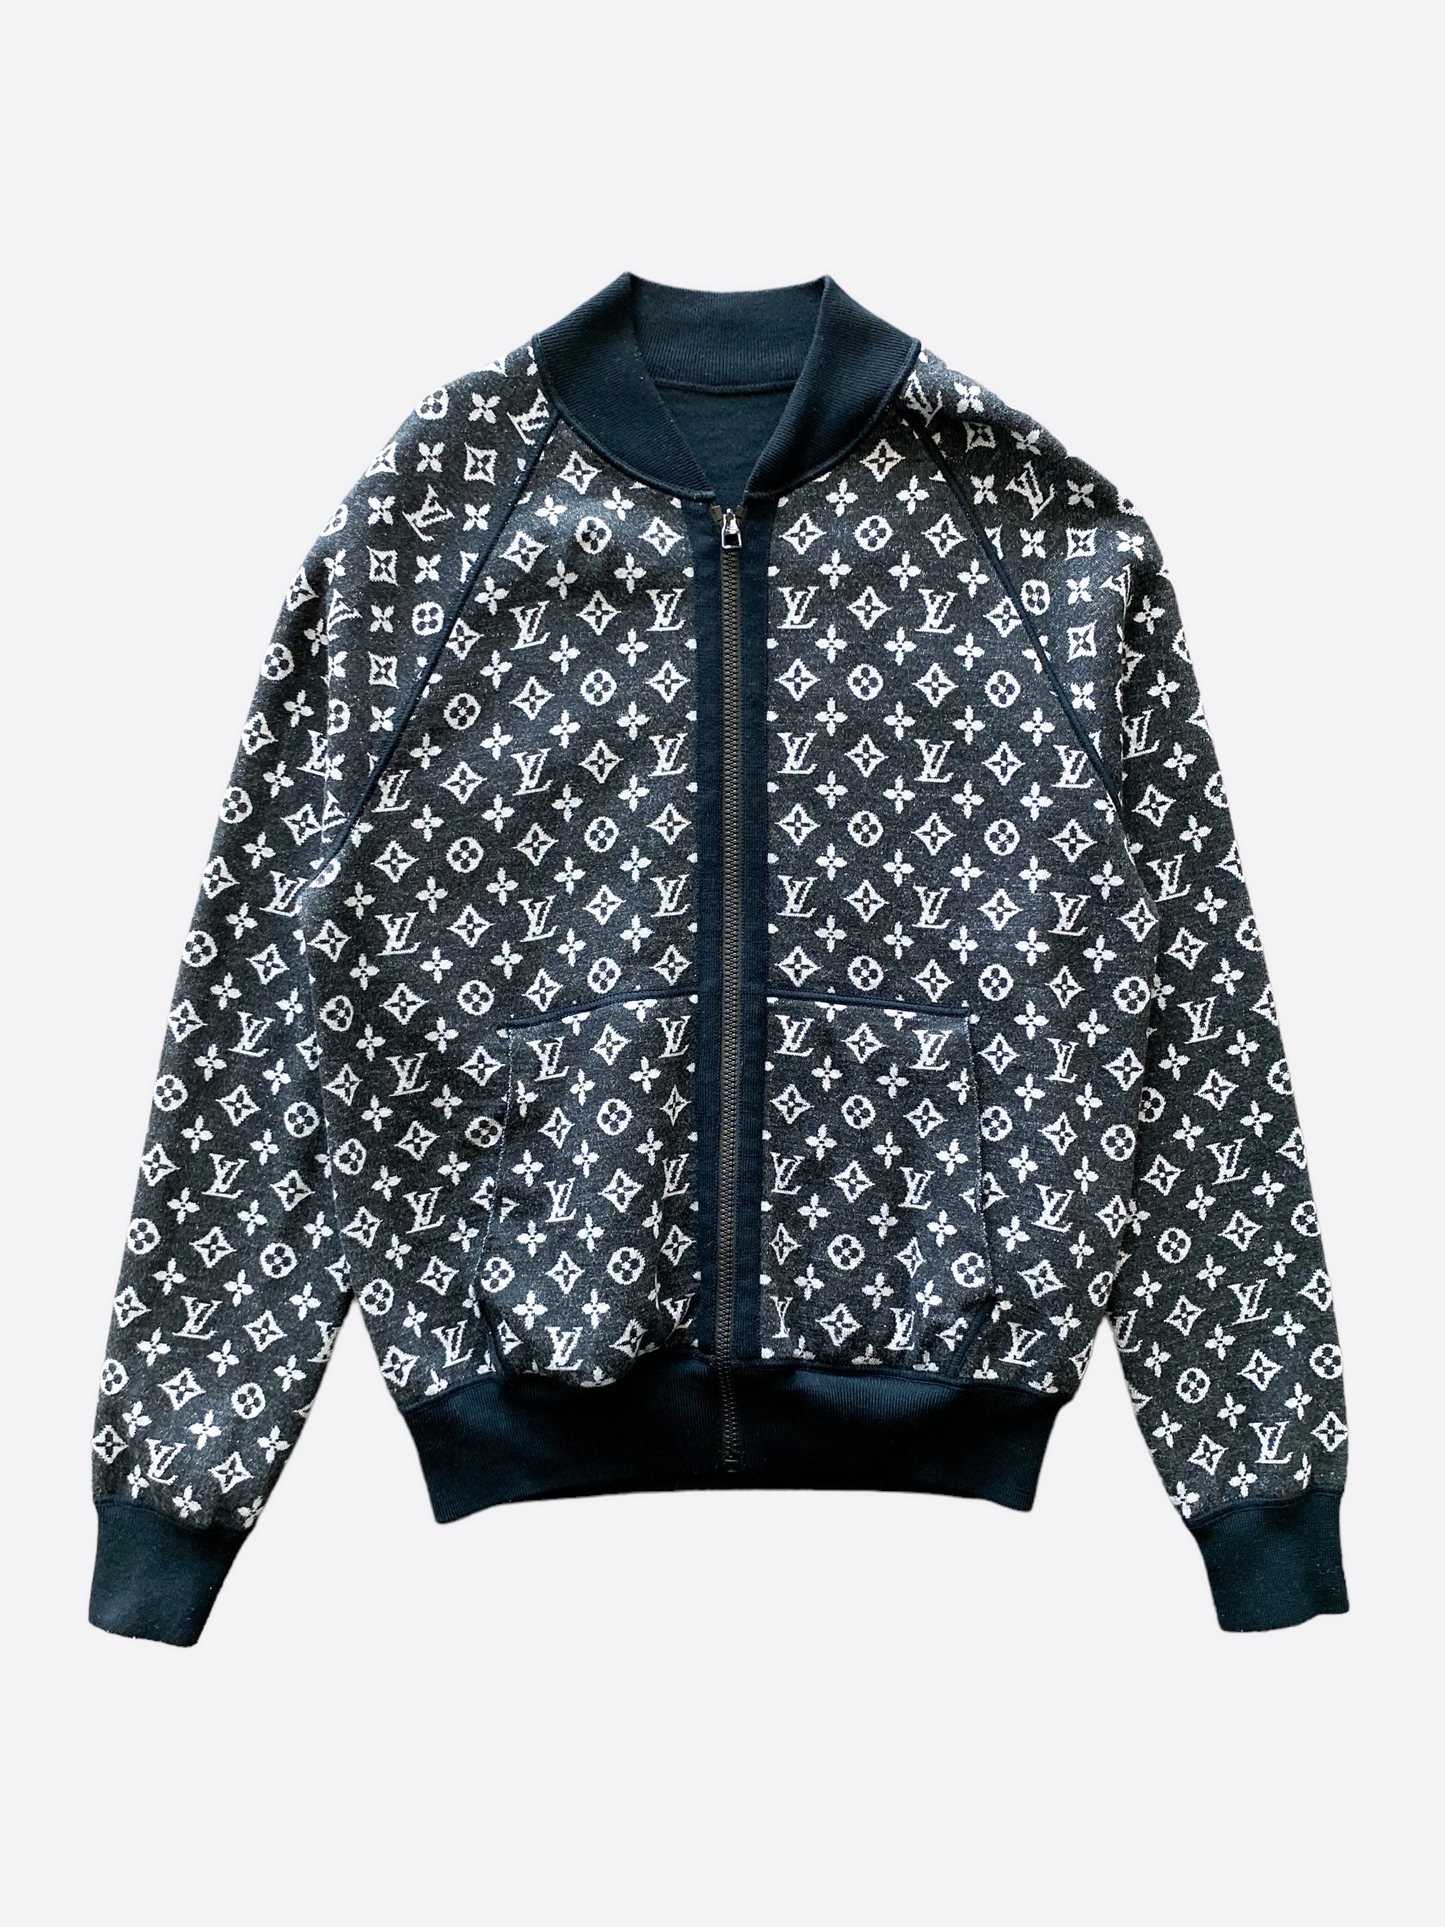 Louis Vuitton 2000s Pre-Owned Reversible Bomber Jacket - ShopStyle